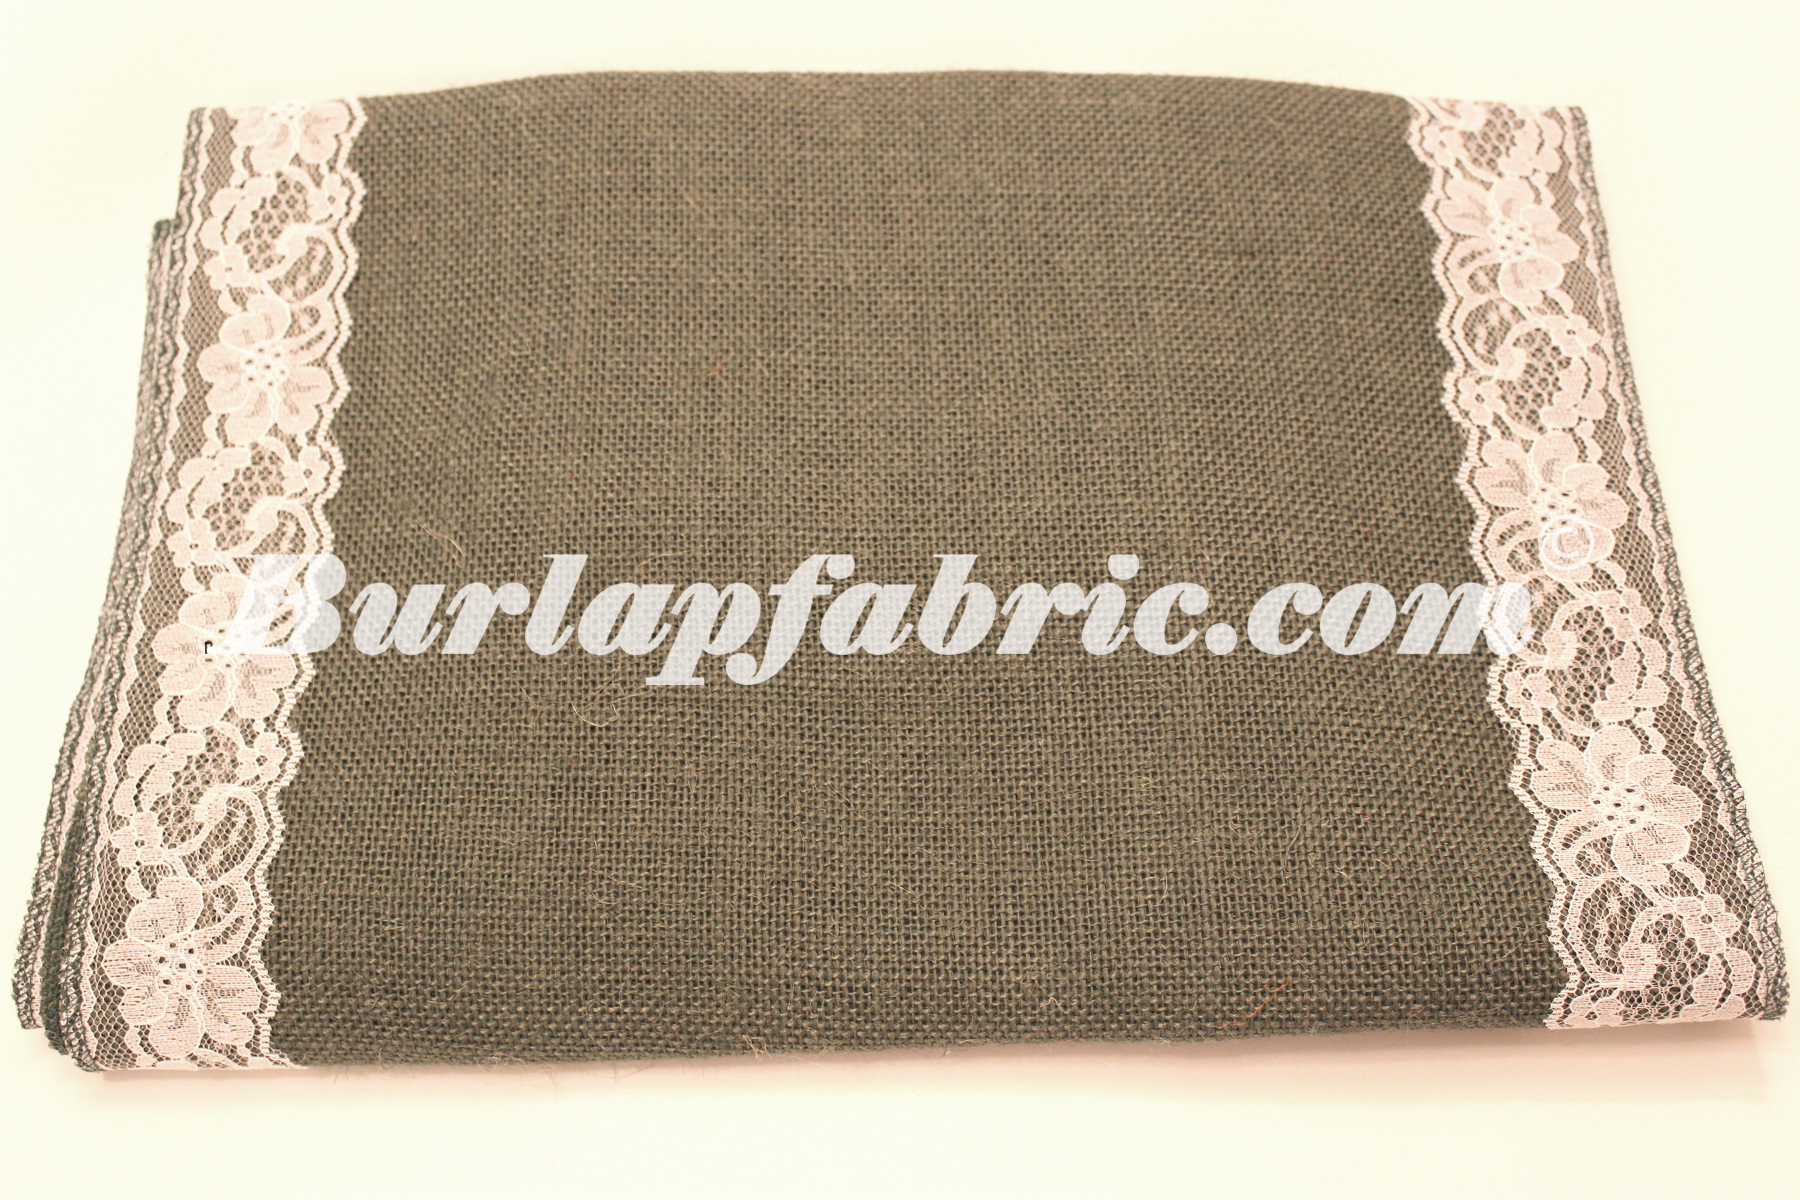 14" Charcoal Grey Burlap Runner with 2" White Lace Borders - Click Image to Close